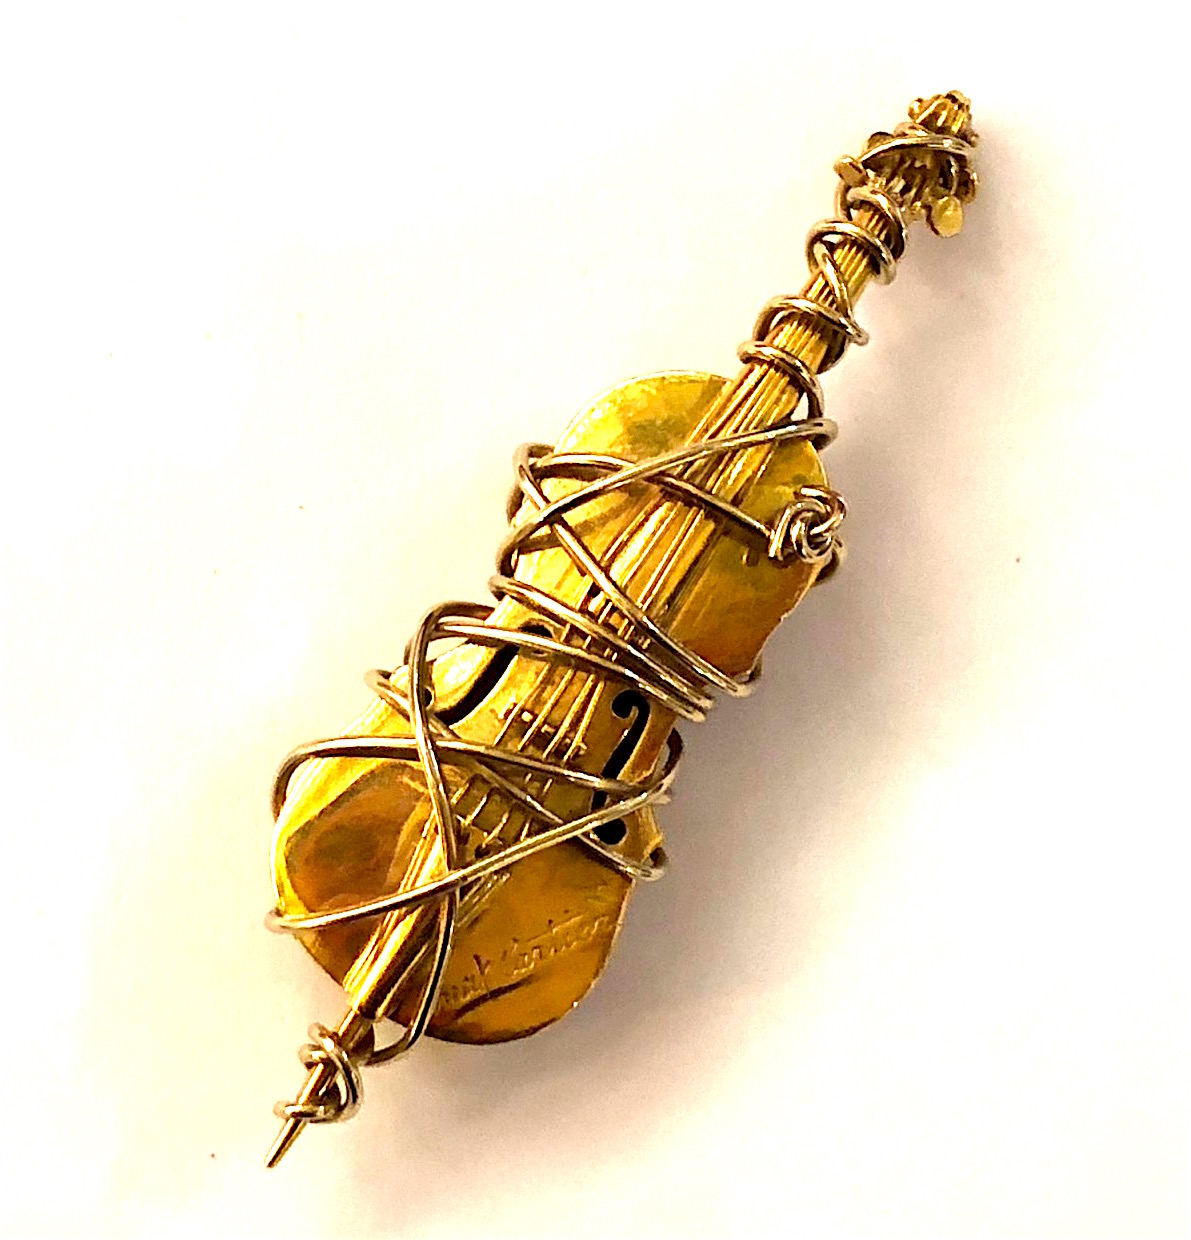 Max Cartier, Paris (born 1935, Film Director, Sculptor) 18K yellow and white gold signature “wrapped” bass or cello sculptural brooch. Signed: Max Cartier (script signature) on lower front right, French maker’s mark with an A L in a diamond poincon, French mark with a M C in a diamond poincon for Max Cartier (2x), French Eagle’s head touch mark for 18k gold (2x), c.1980